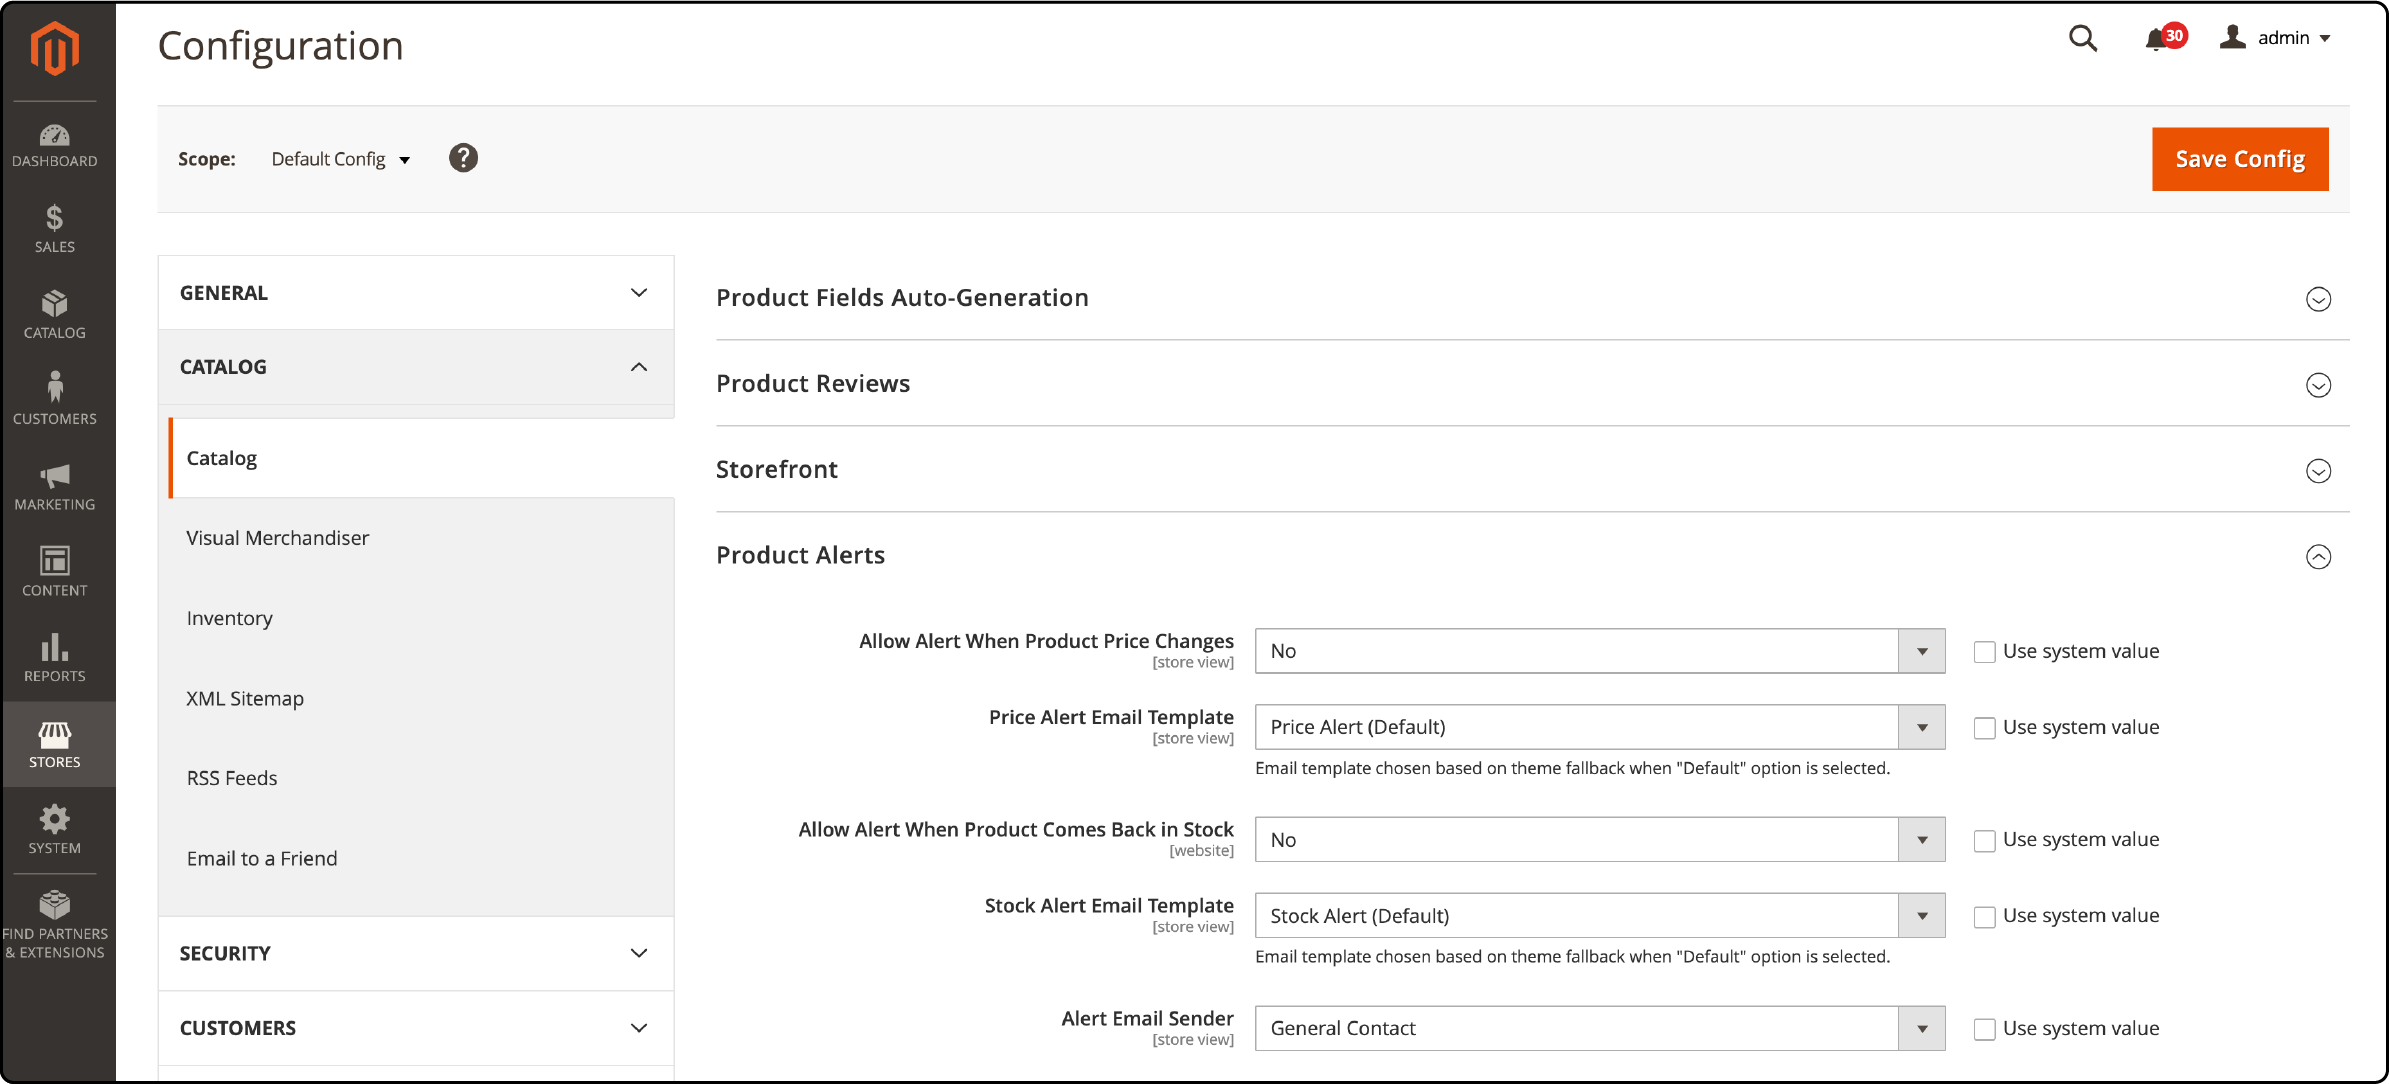 Step-by-step guide on configuring product alerts in Magento 2 for customer engagement